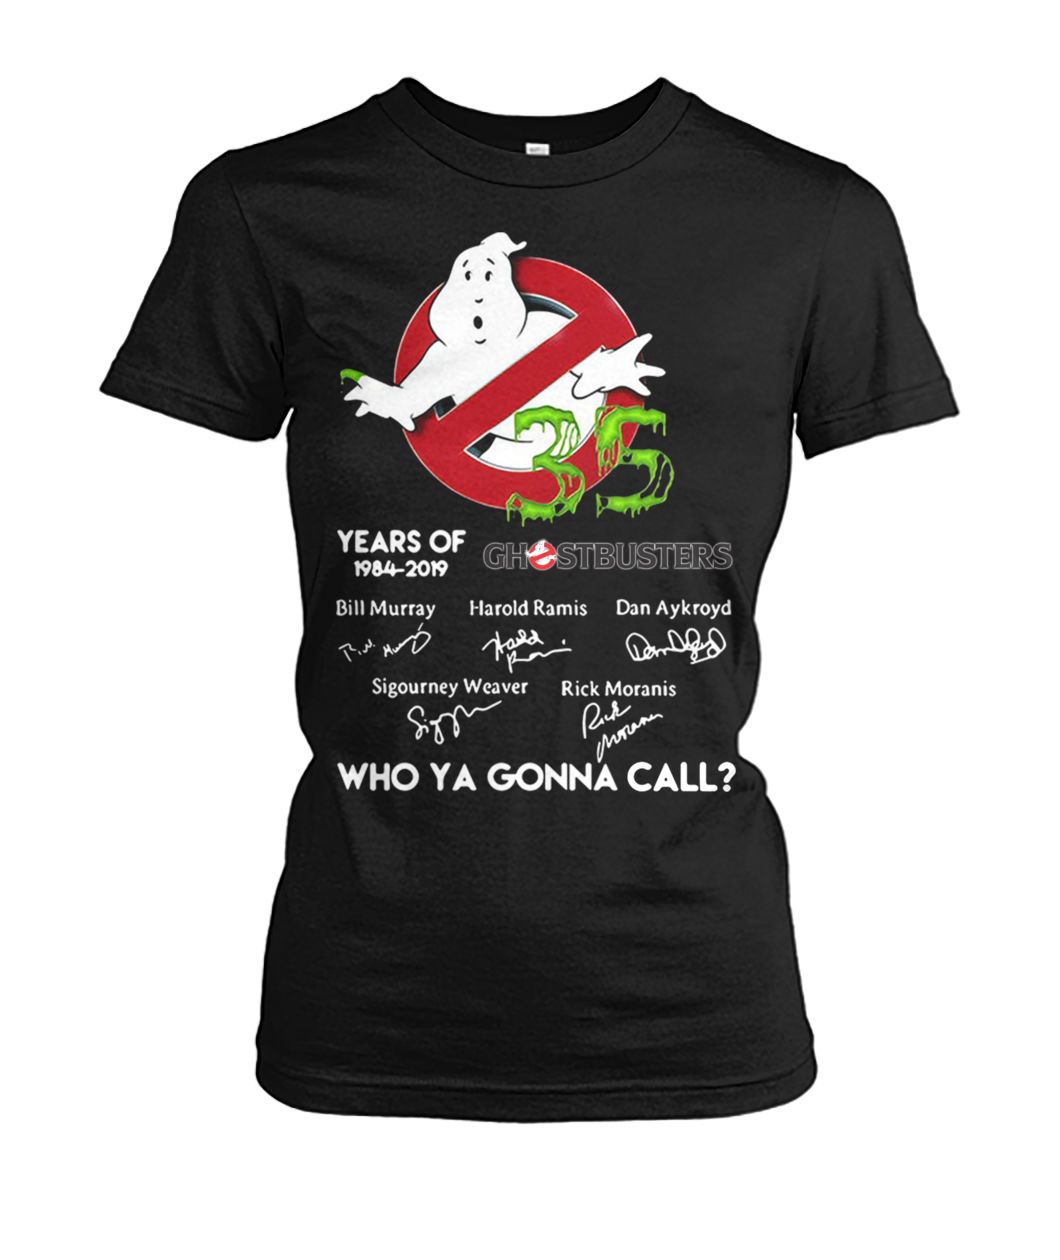 35 years of ghostbusters 1984 2019 signatures who ya gonna call women's crew tee